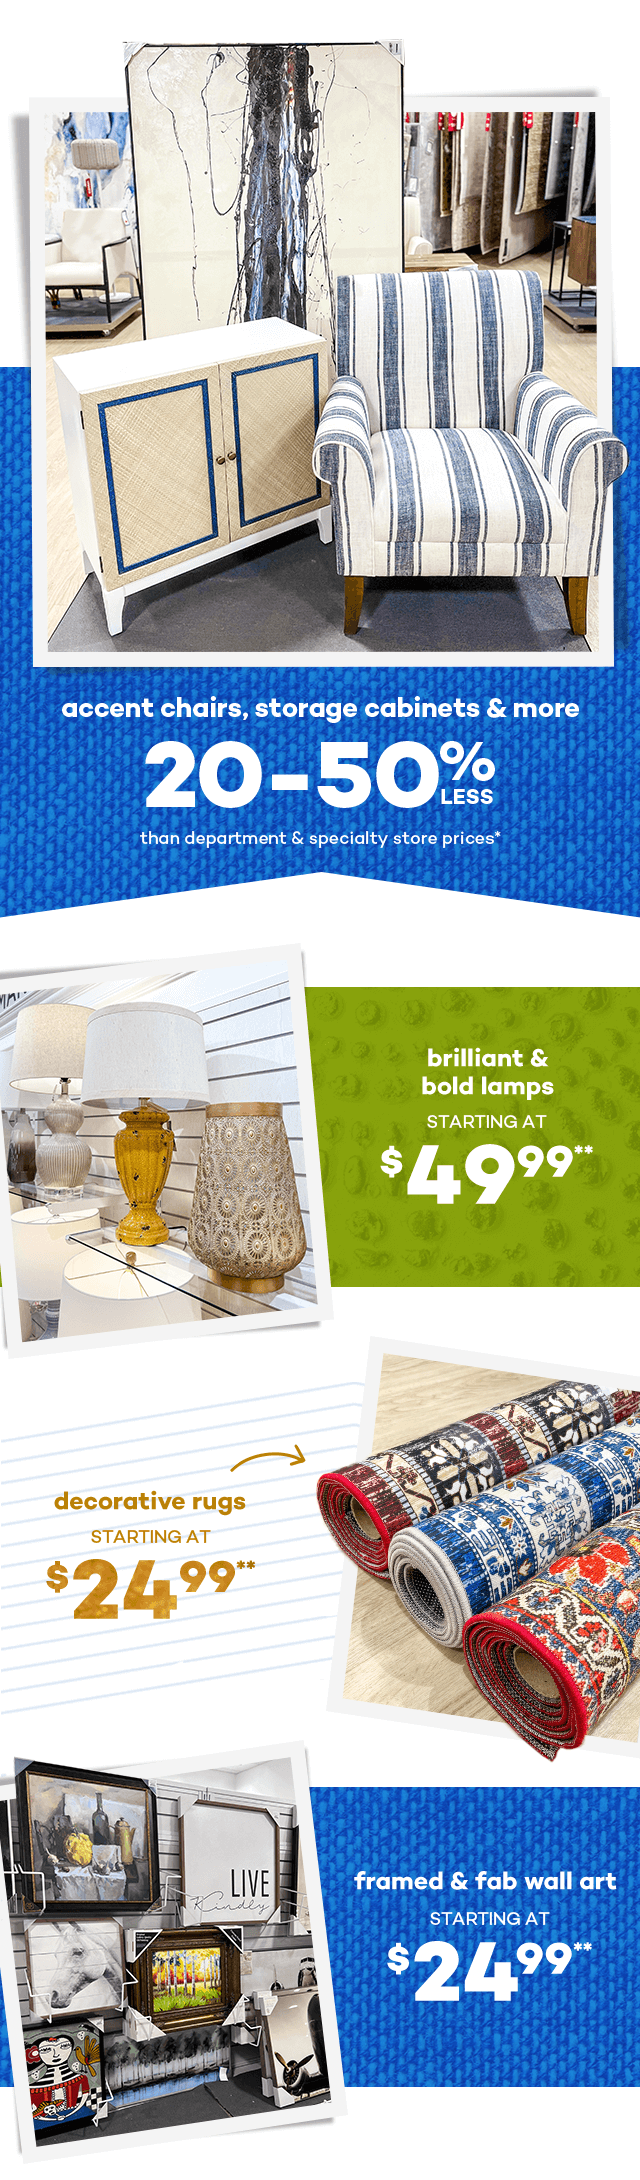 Accent chairs, storage cabinets and more 20 to 50 percent less than department and specialty store prices.* Brilliant and bold lamps starting at $49.99.* Decorative rugs starting at $24.99.** Framed and fab wall art starting at $24.99.**